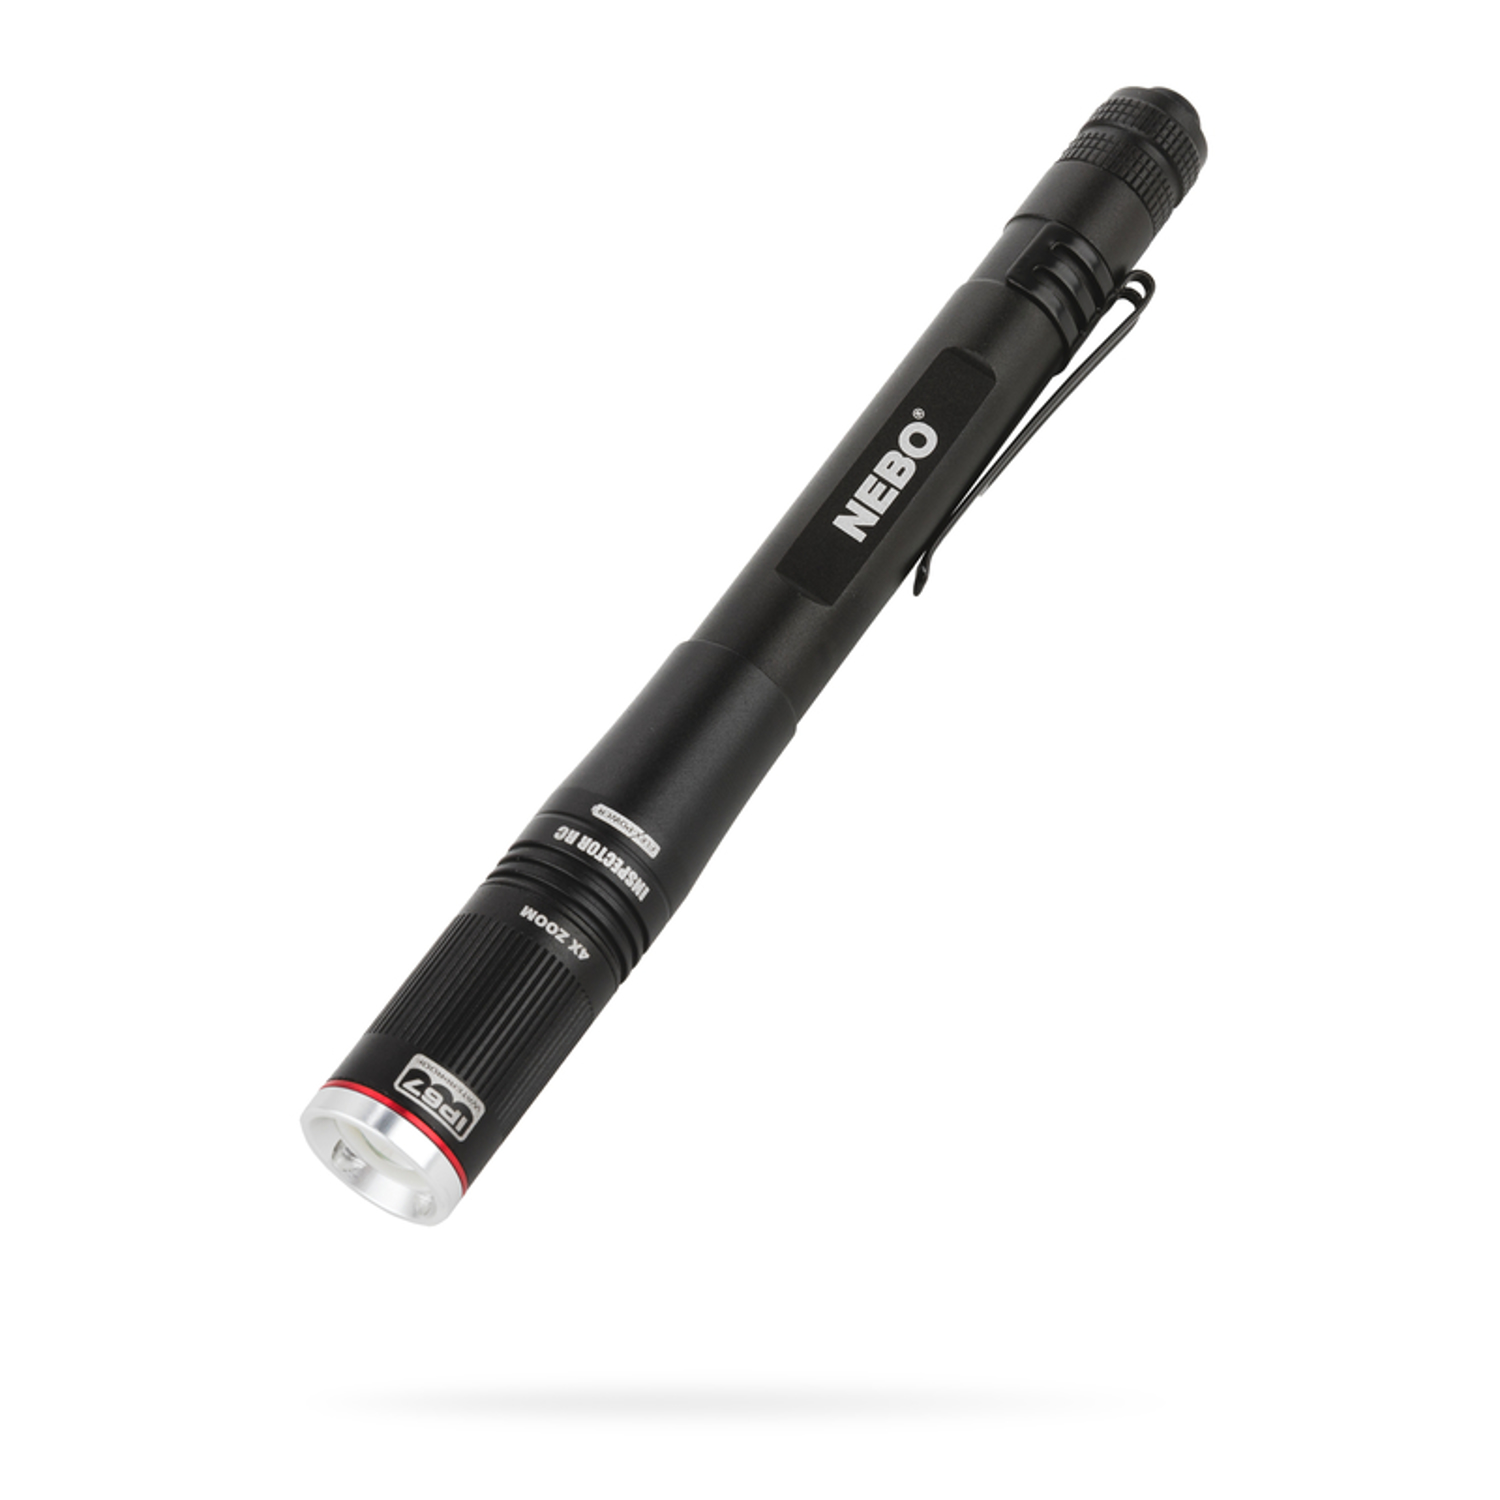 Photos - Torch NEBO Inspector RC 360 lm Black LED Pen Light AAA Battery NEB-POC-0005 